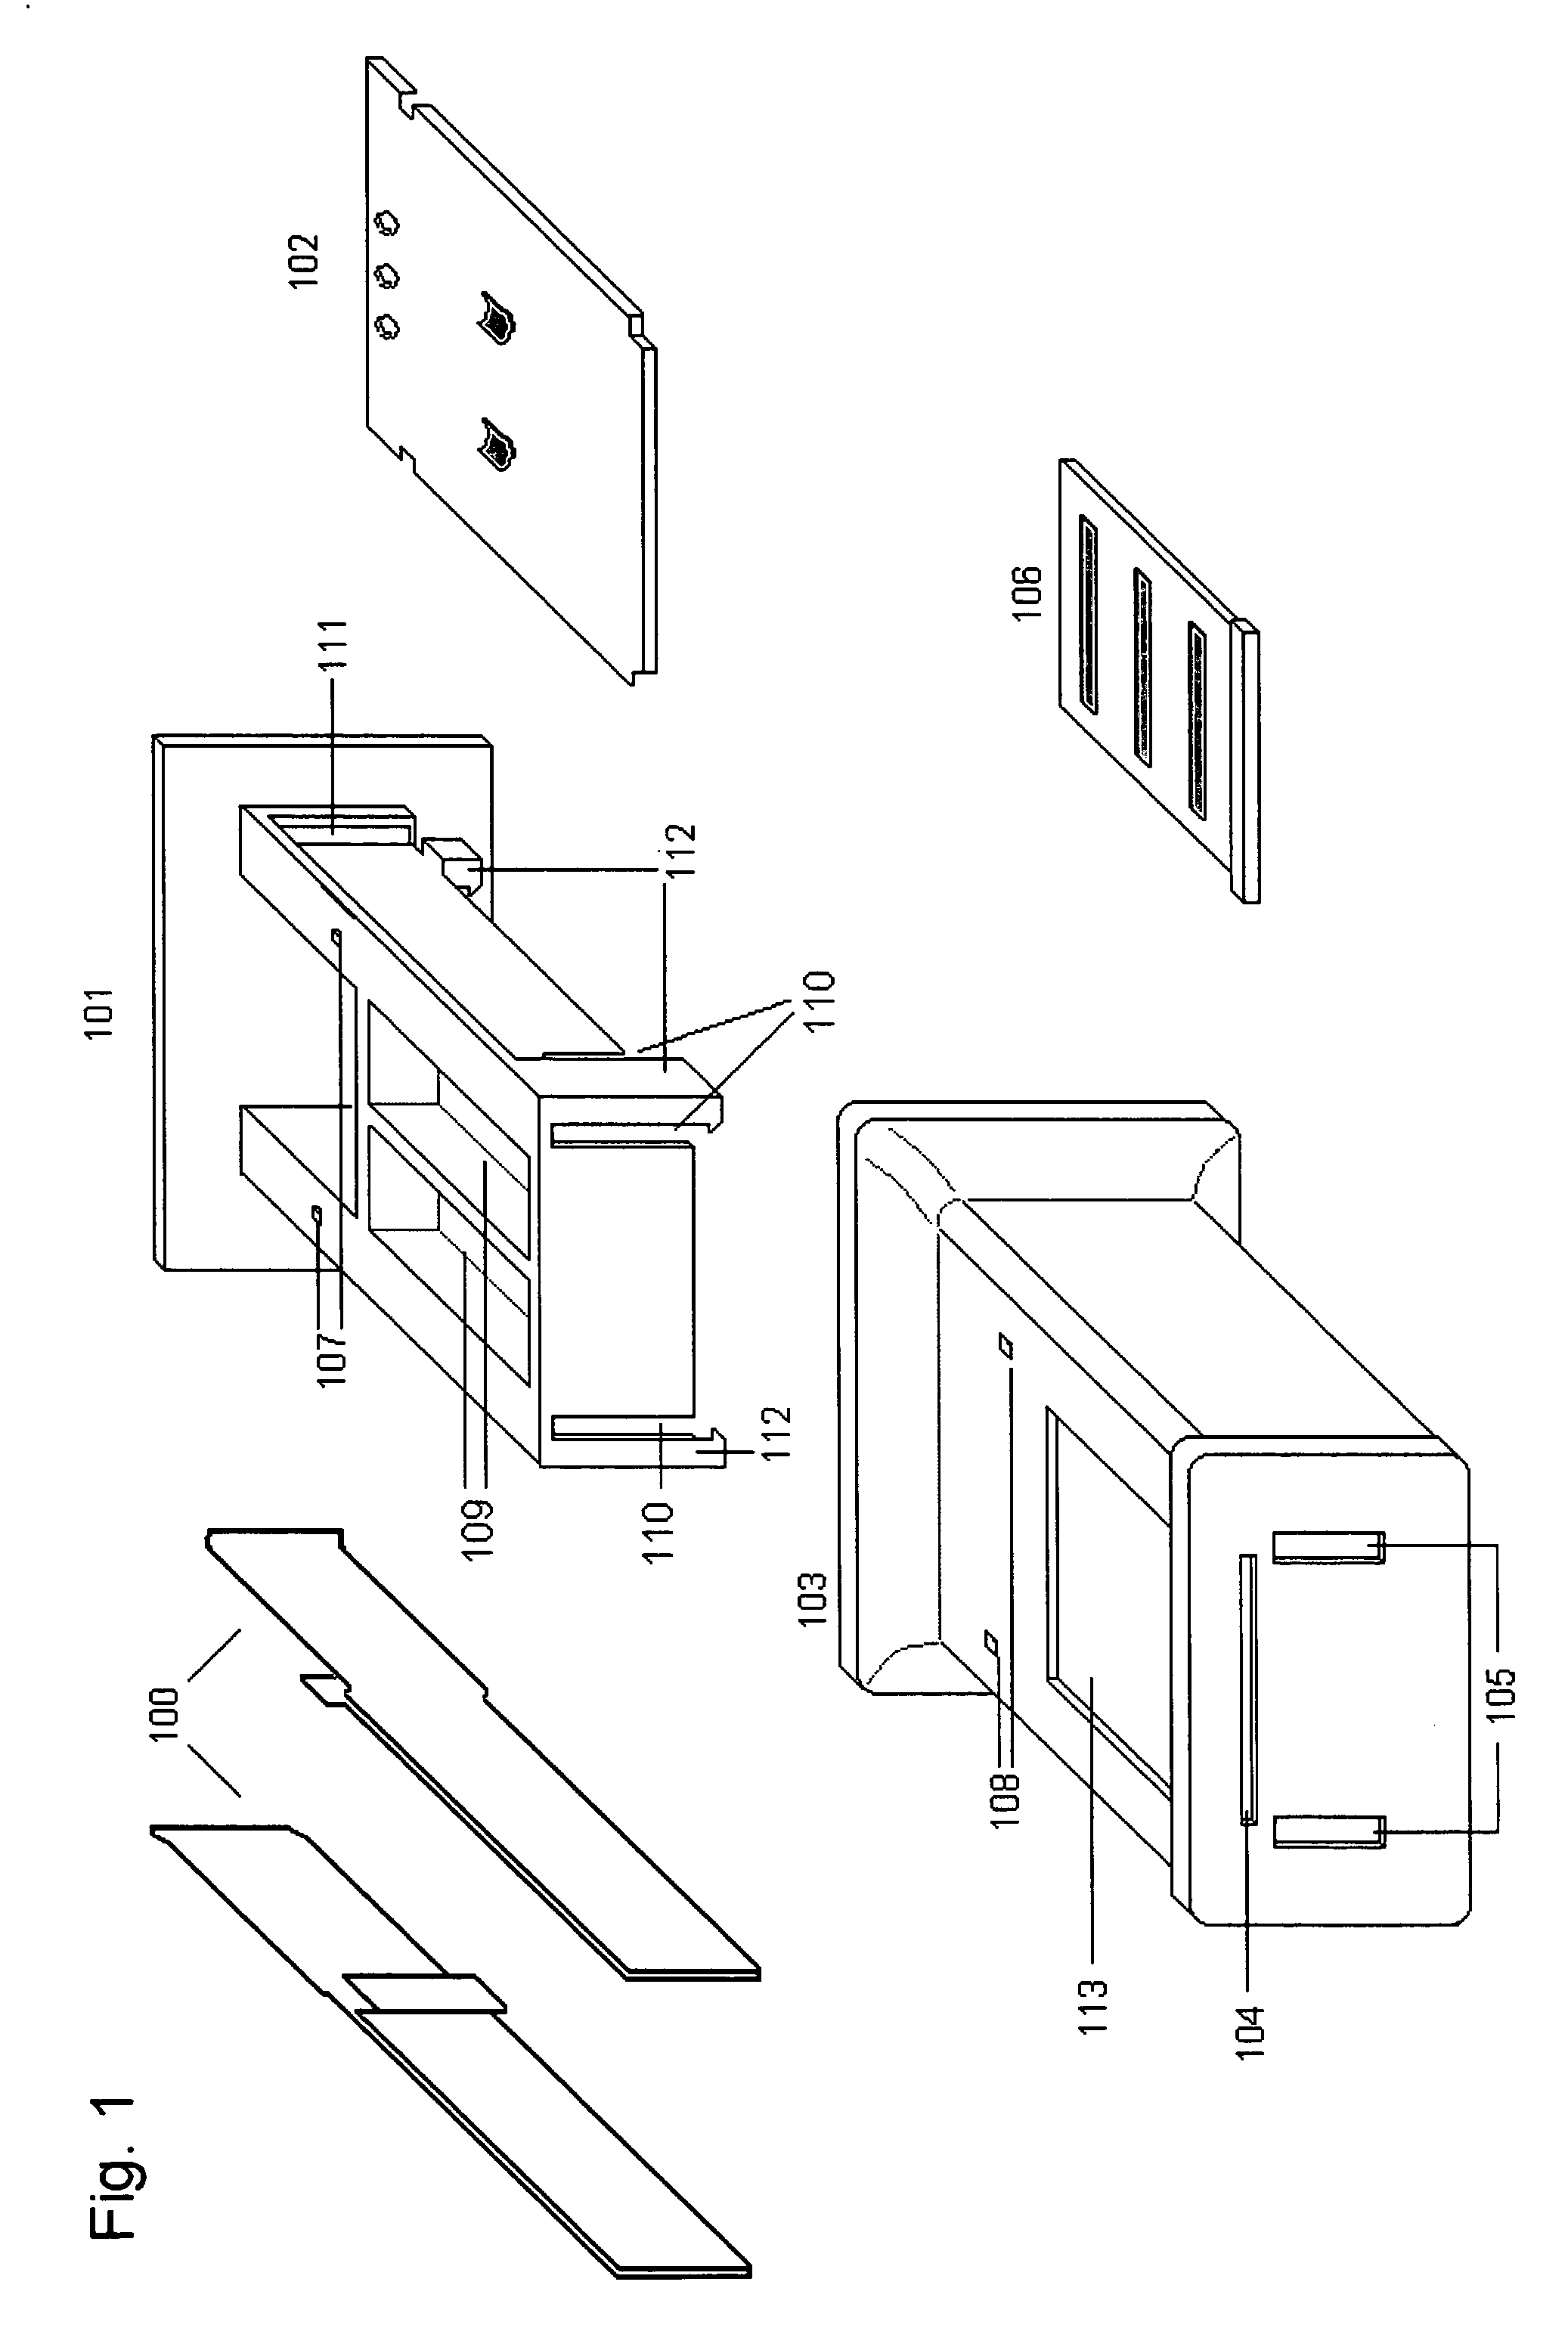 Plug and cord connector set with integrated circuitry